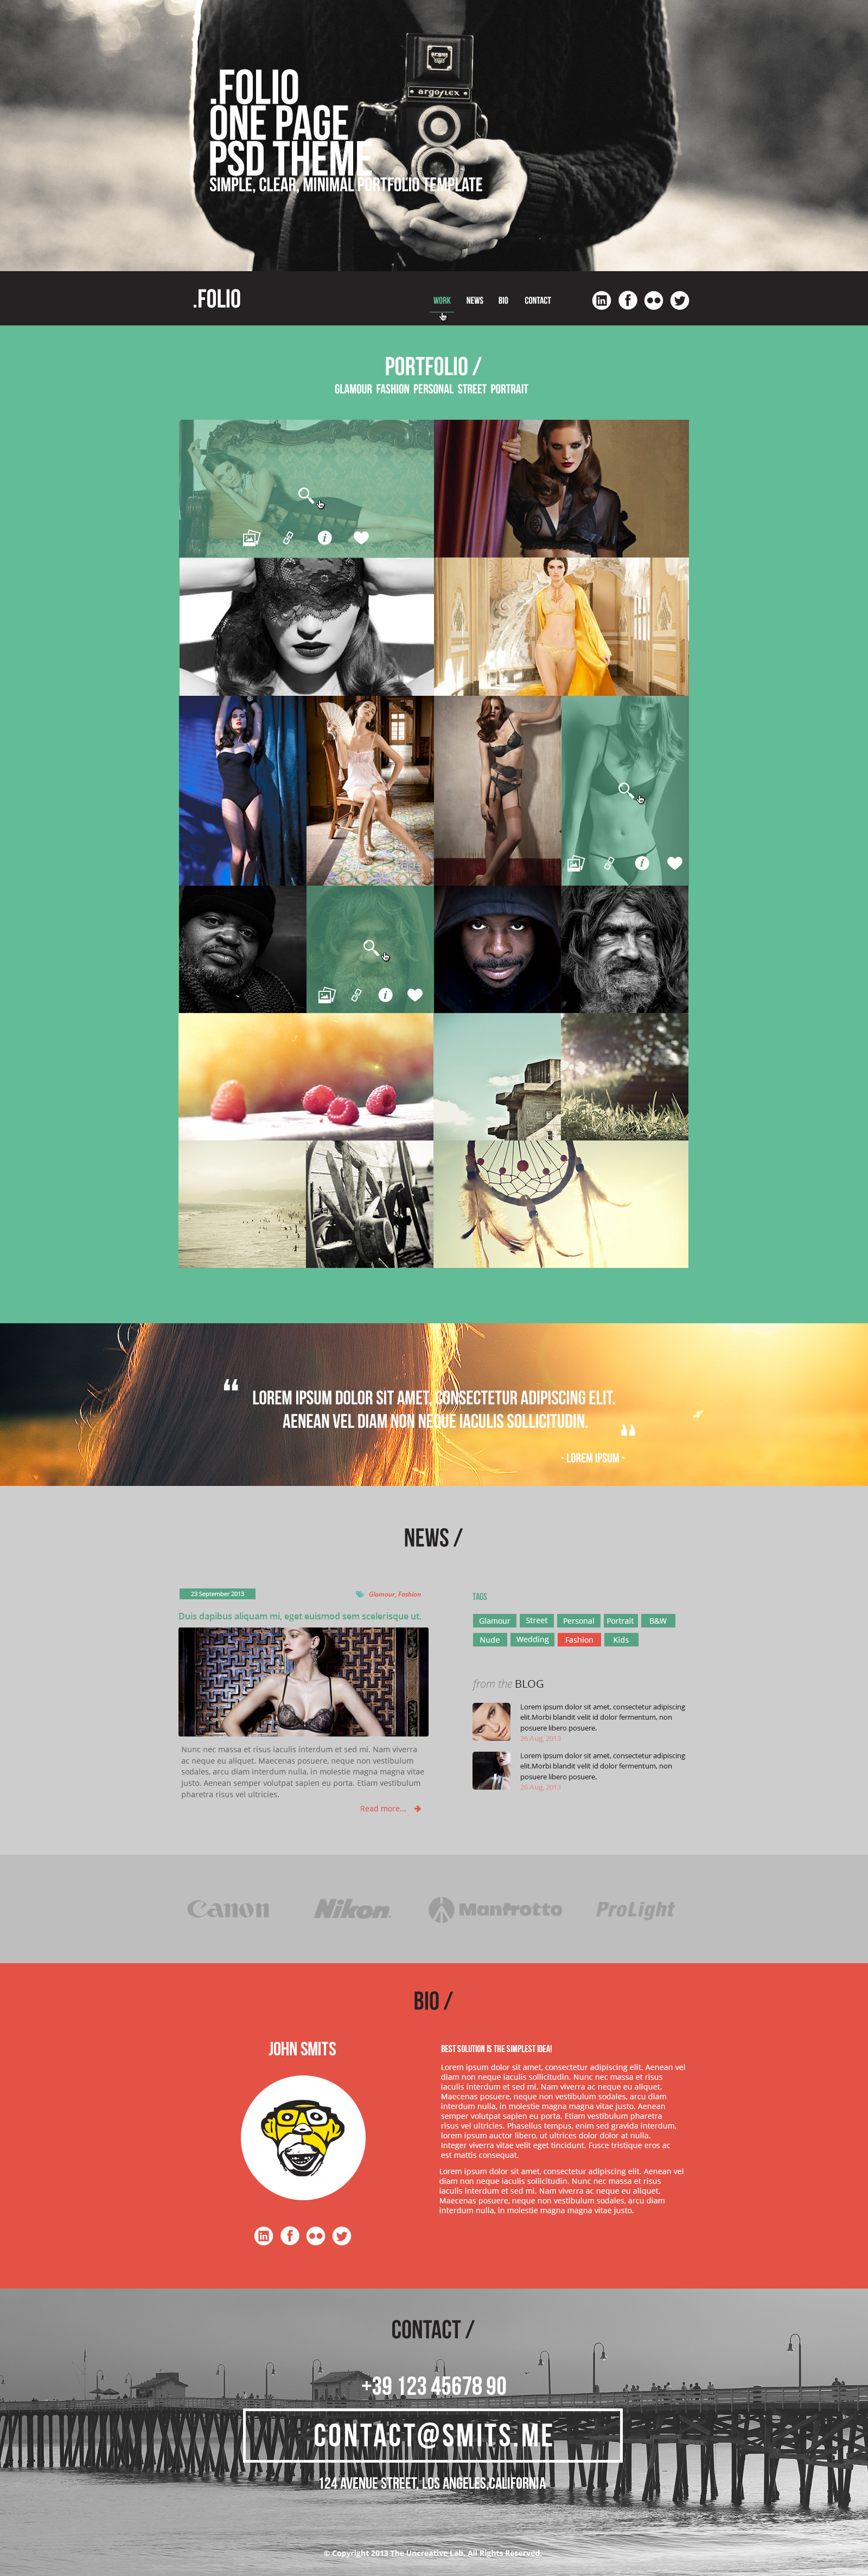 One Page PSD Theme